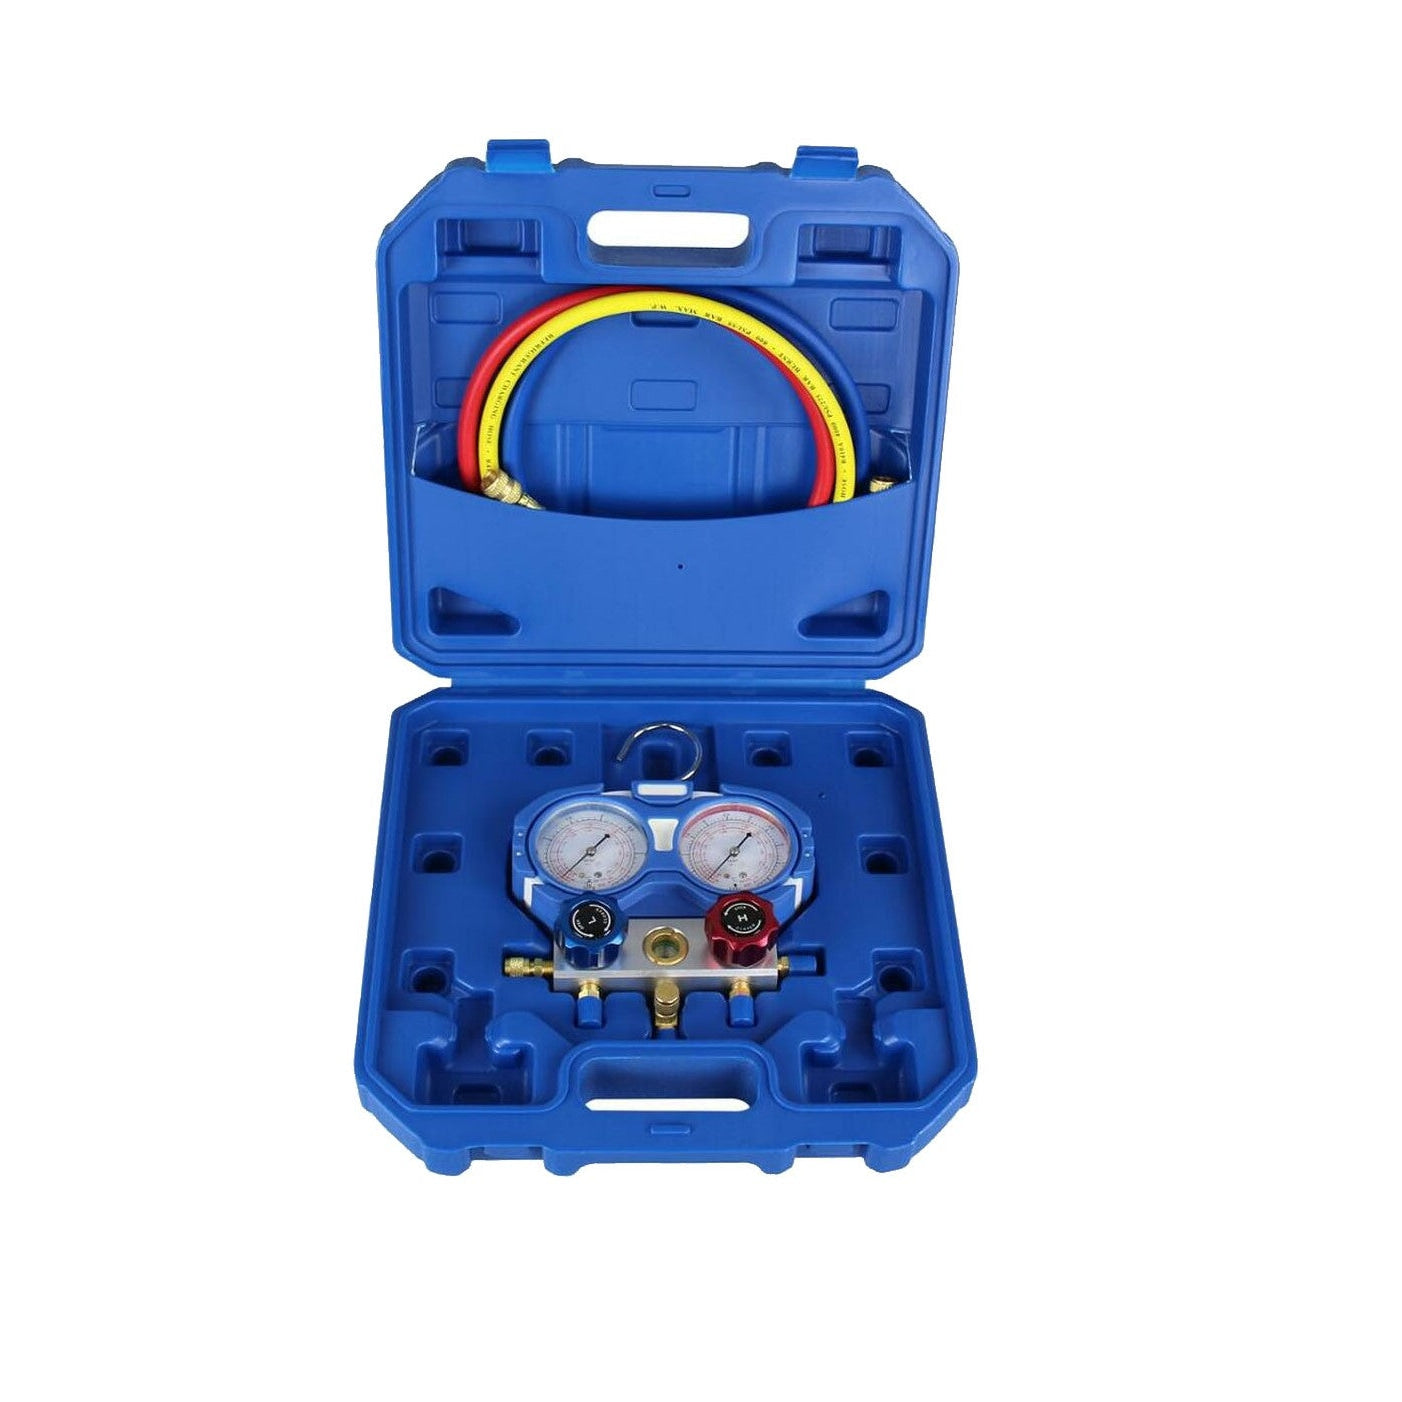 AUTOMOTIVE AIR-CON CHARGING AND LEAK DETECTION—Kit21*